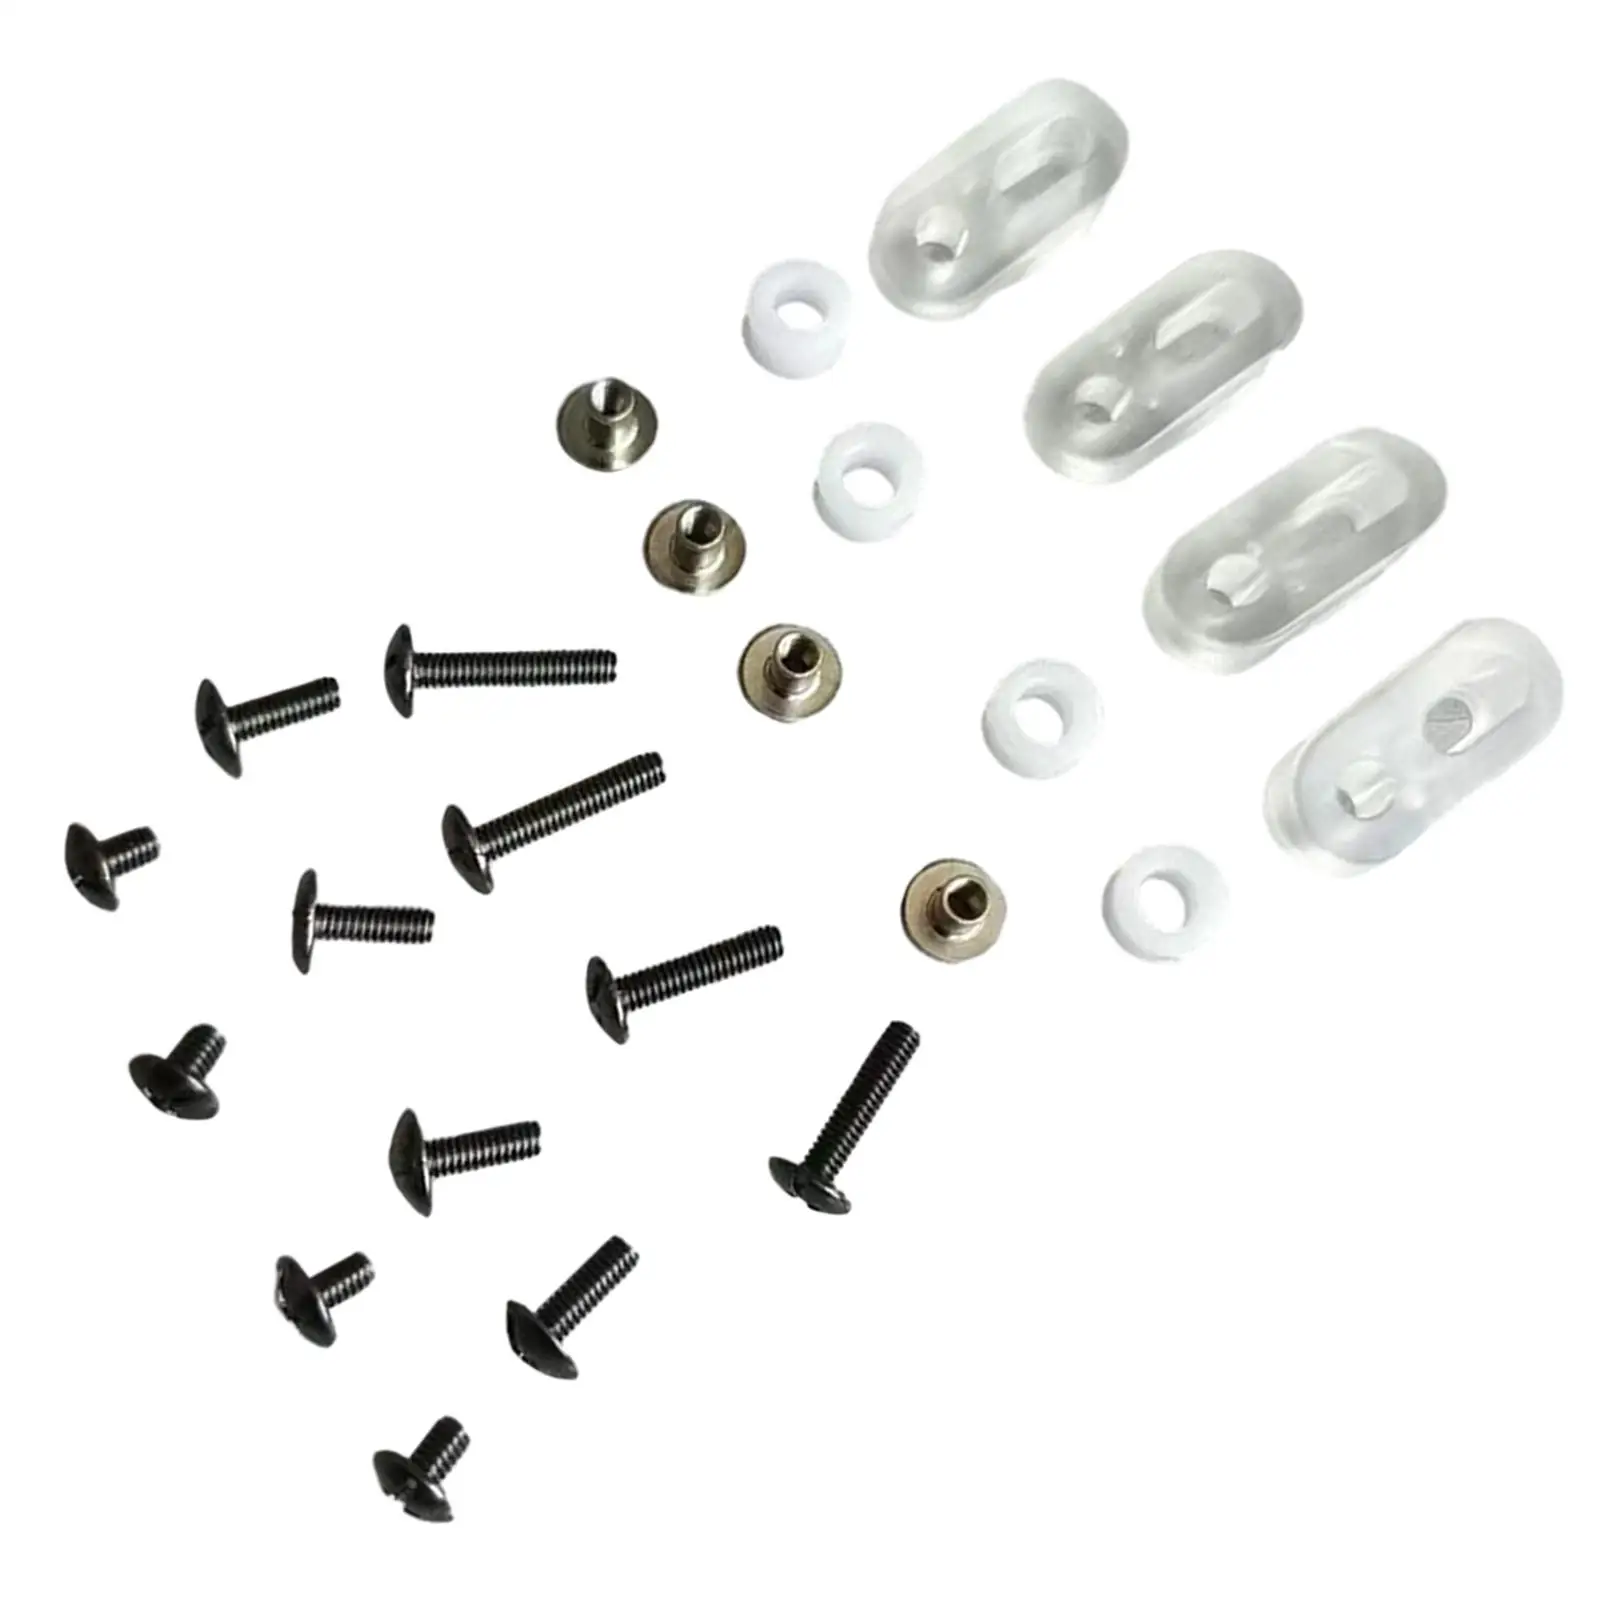 Ice Hockey Visor Hardware Kit Screw Washers Nuts Spare Parts Accessories